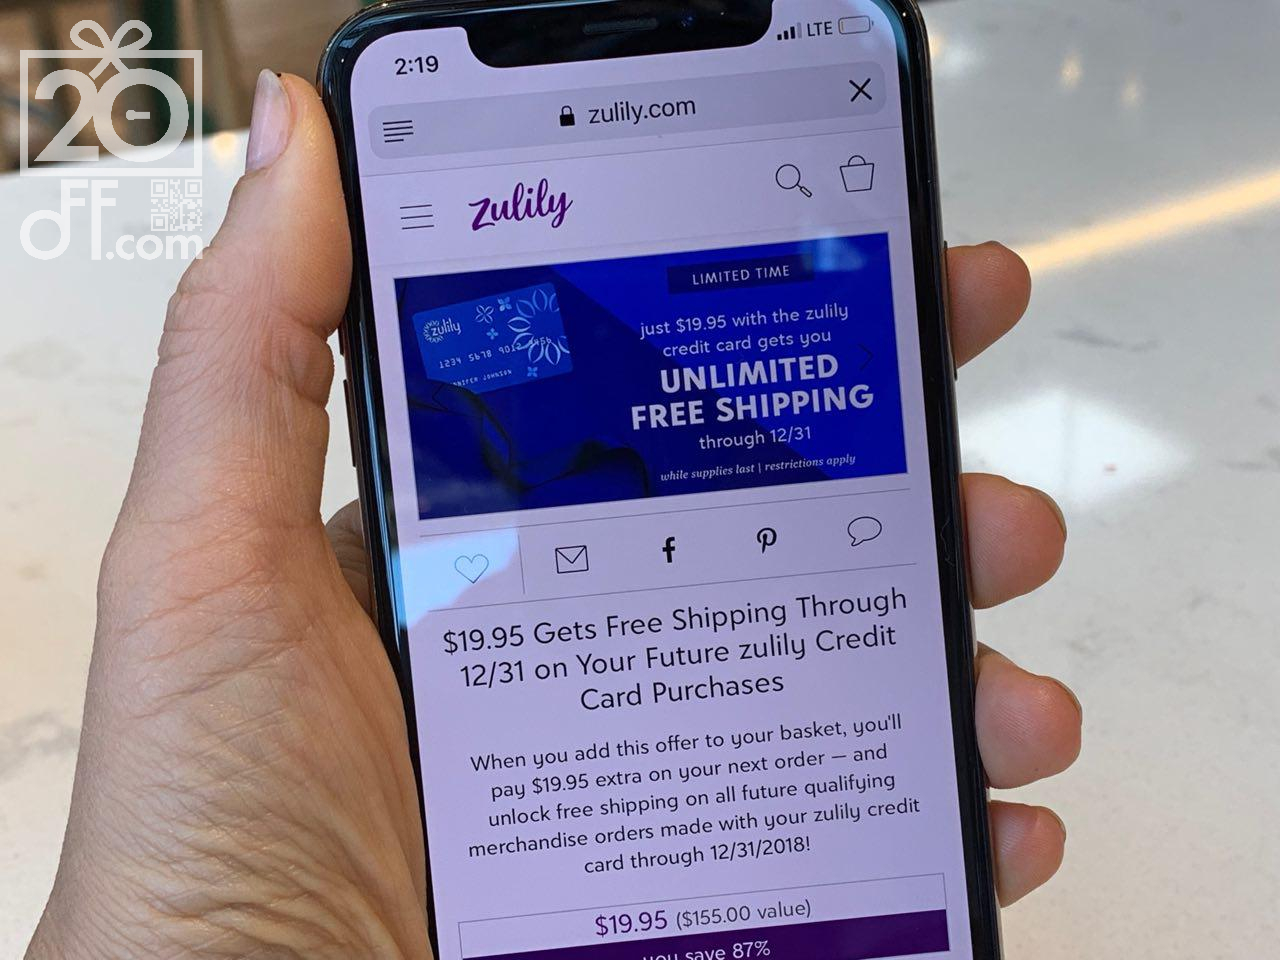 Zulily Unlimited Free Shipping